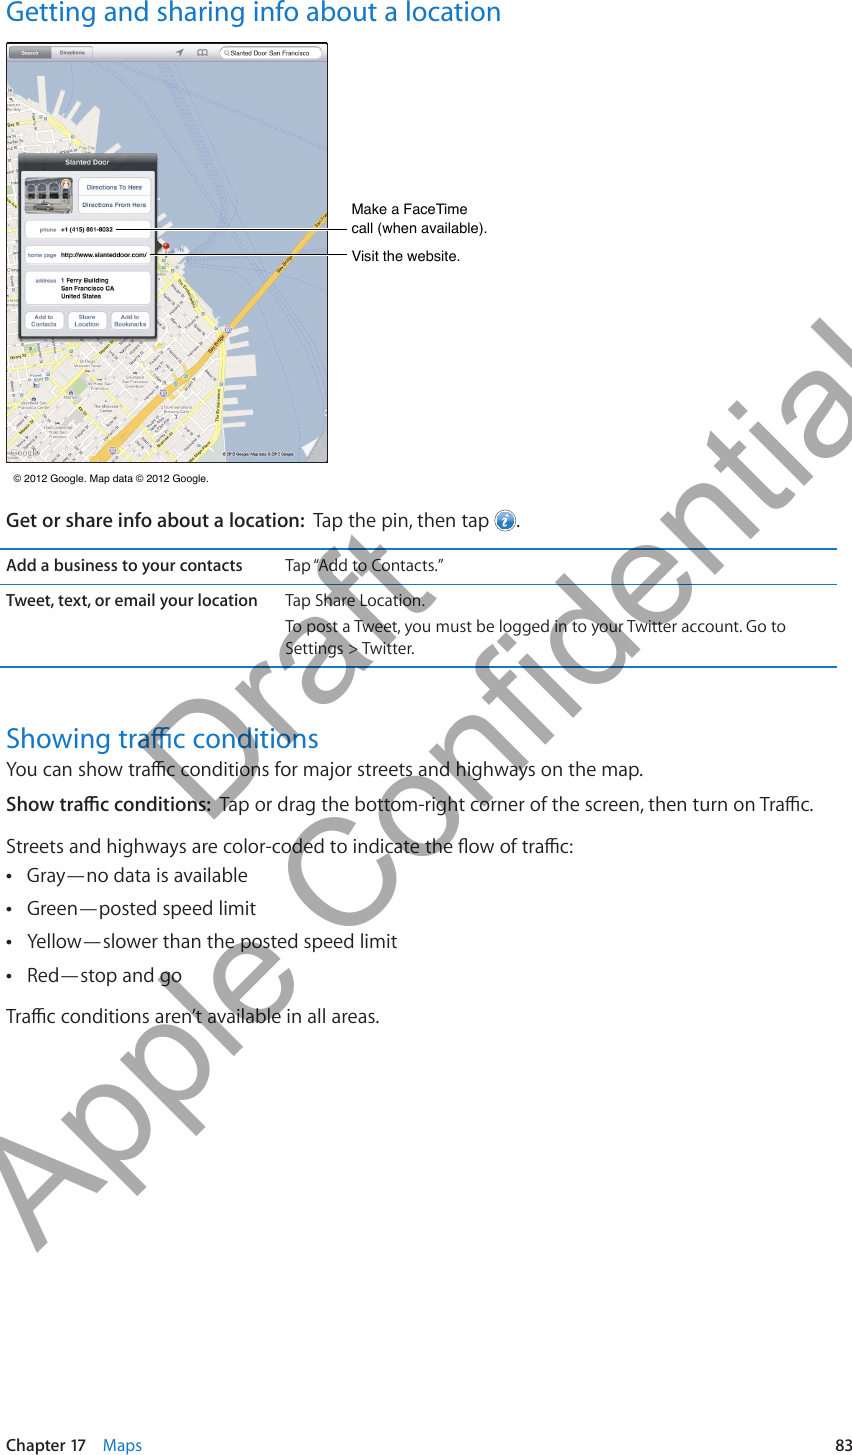 Getting and sharing info about a locationMake a FaceTime call (when available).Make a FaceTime call (when available).Visit the website.Visit the website. © 2012 Google. Map data © 2012 Google.  © 2012 Google. Map data © 2012 Google. Get or share info about a location:  Tap the pin, then tap  .Add a business to your contacts Tap “Add to Contacts.”Tweet, text, or email your location Tap Share Location.To post a Tweet, you must be logged in to your Twitter account. Go to Settings &gt; Twitter.Showing trac conditionsYou can show trac conditions for major streets and highways on the map. Show trac conditions:  Tap or drag the bottom-right corner of the screen, then turn on Trac.Streets and highways are color-coded to indicate the ow of trac:Gray—no data is available ÂGreen—posted speed limit ÂYellow—slower than the posted speed limit ÂRed—stop and go ÂTrac conditions aren’t available in all areas.83Chapter 17    Maps          Draft  Apple Confidential 